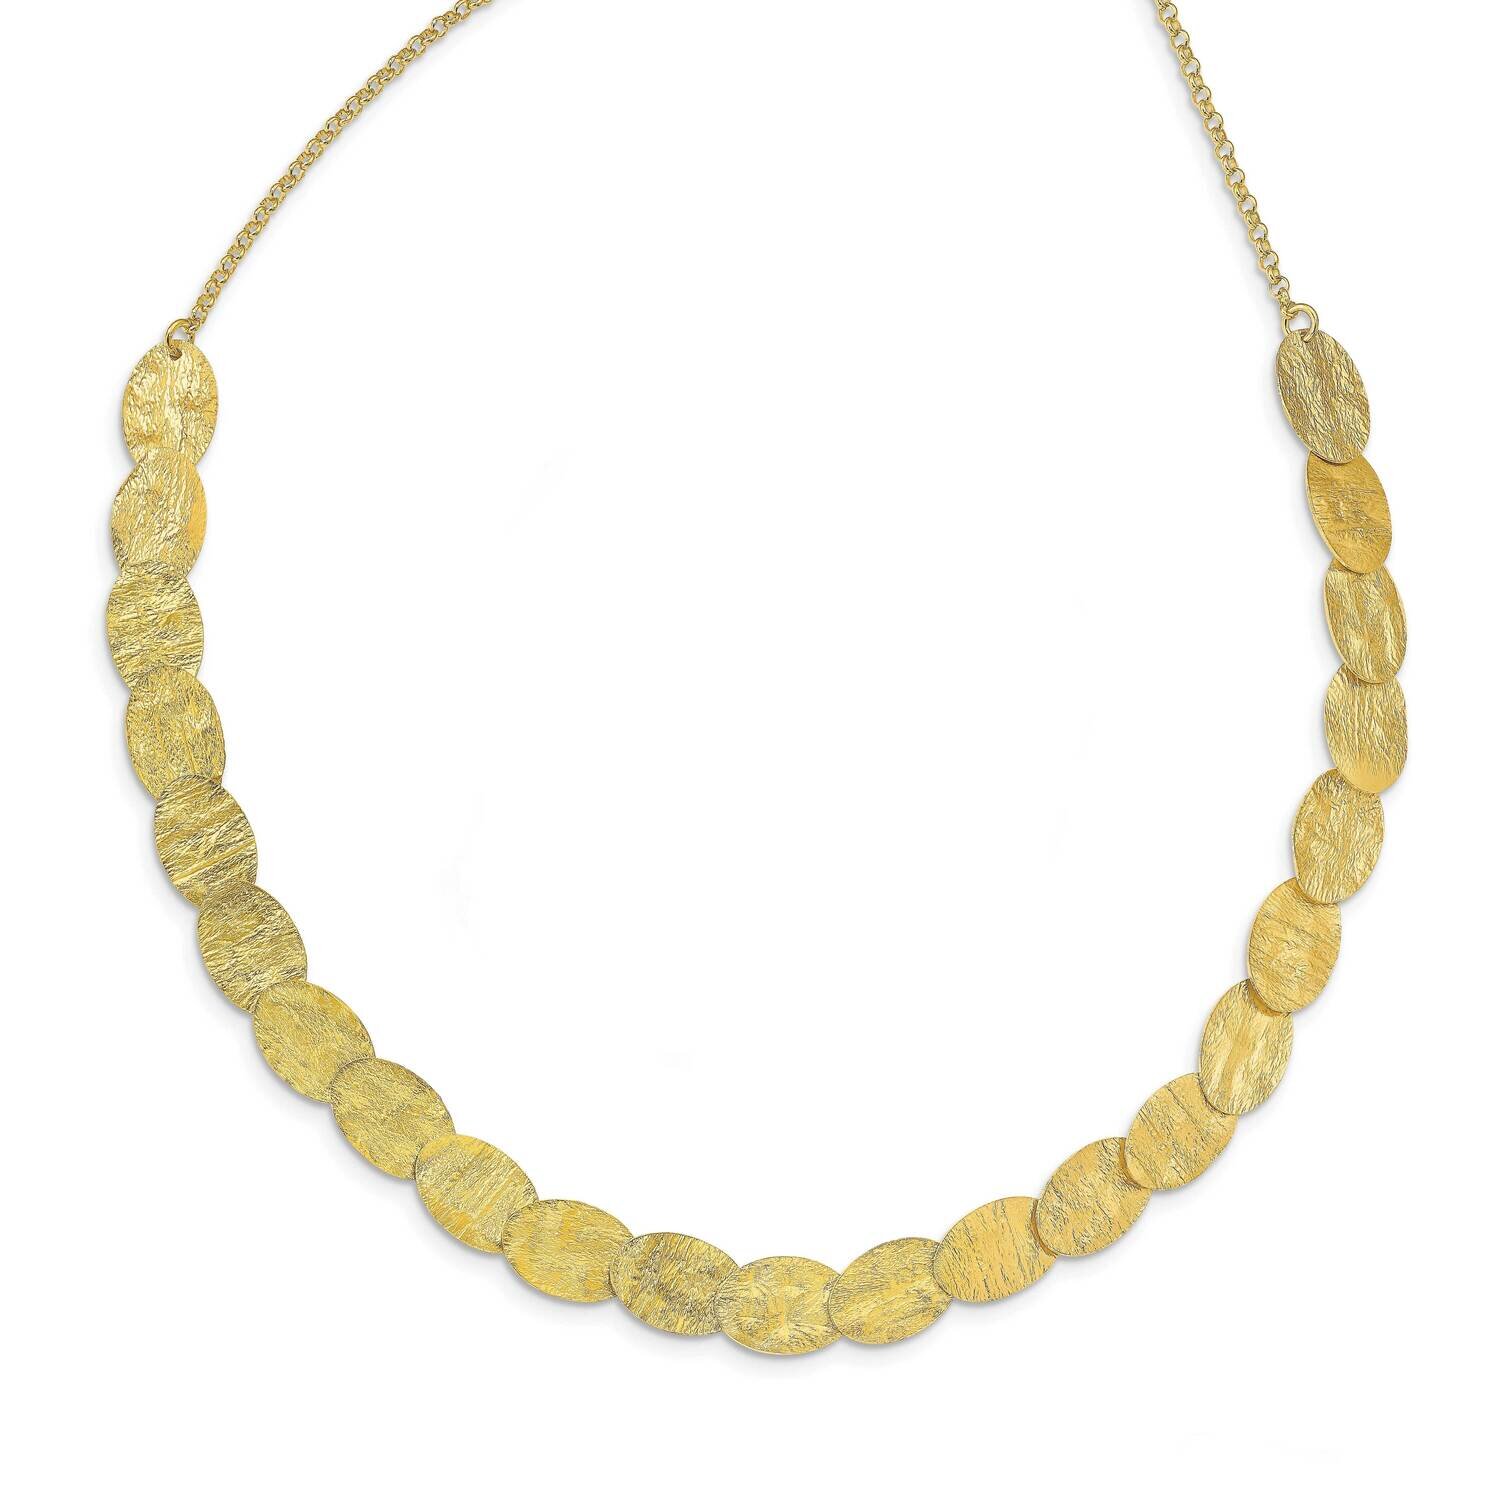 Textured with 1.5 Inch Extender Necklace Sterling Silver Gold-tone HB-QLF1151-17